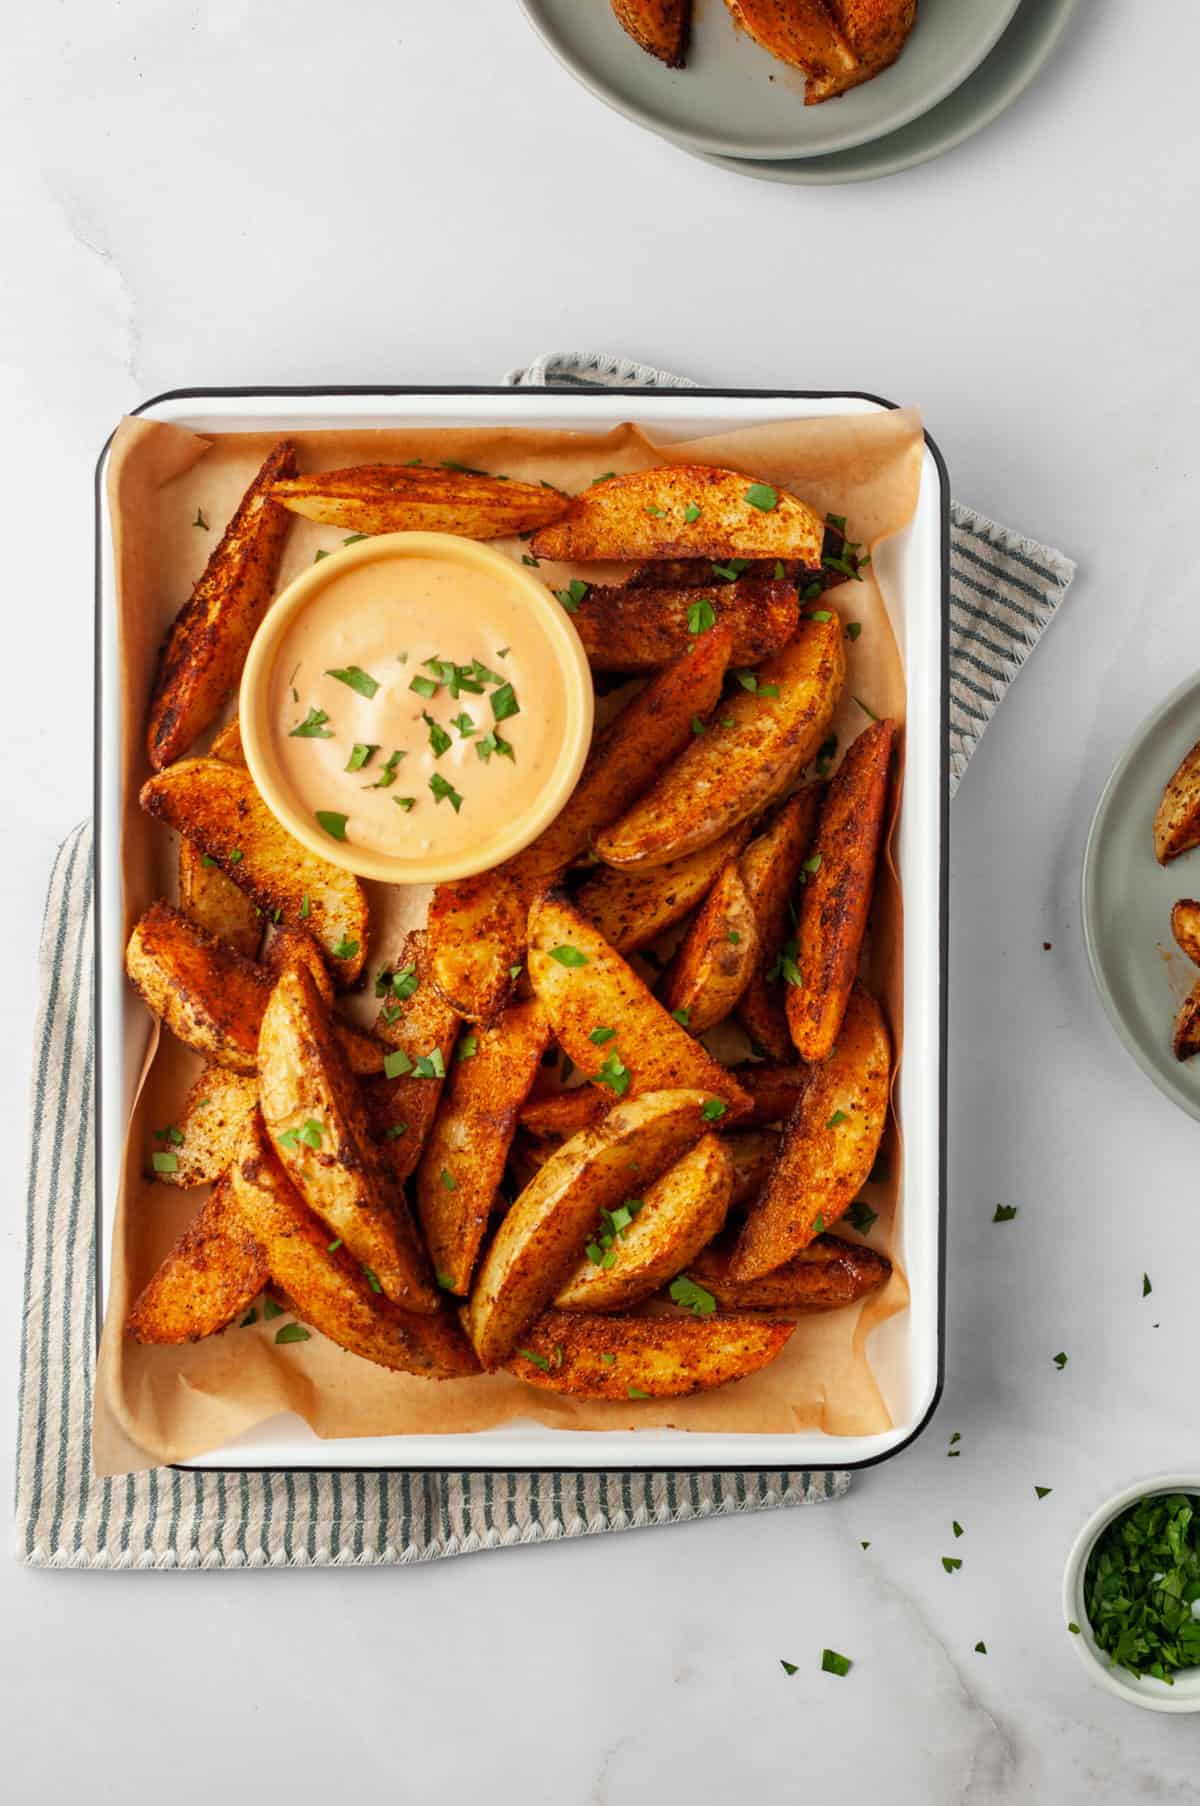 Barbecue potato wedges on tray with bowl of dipping sauce